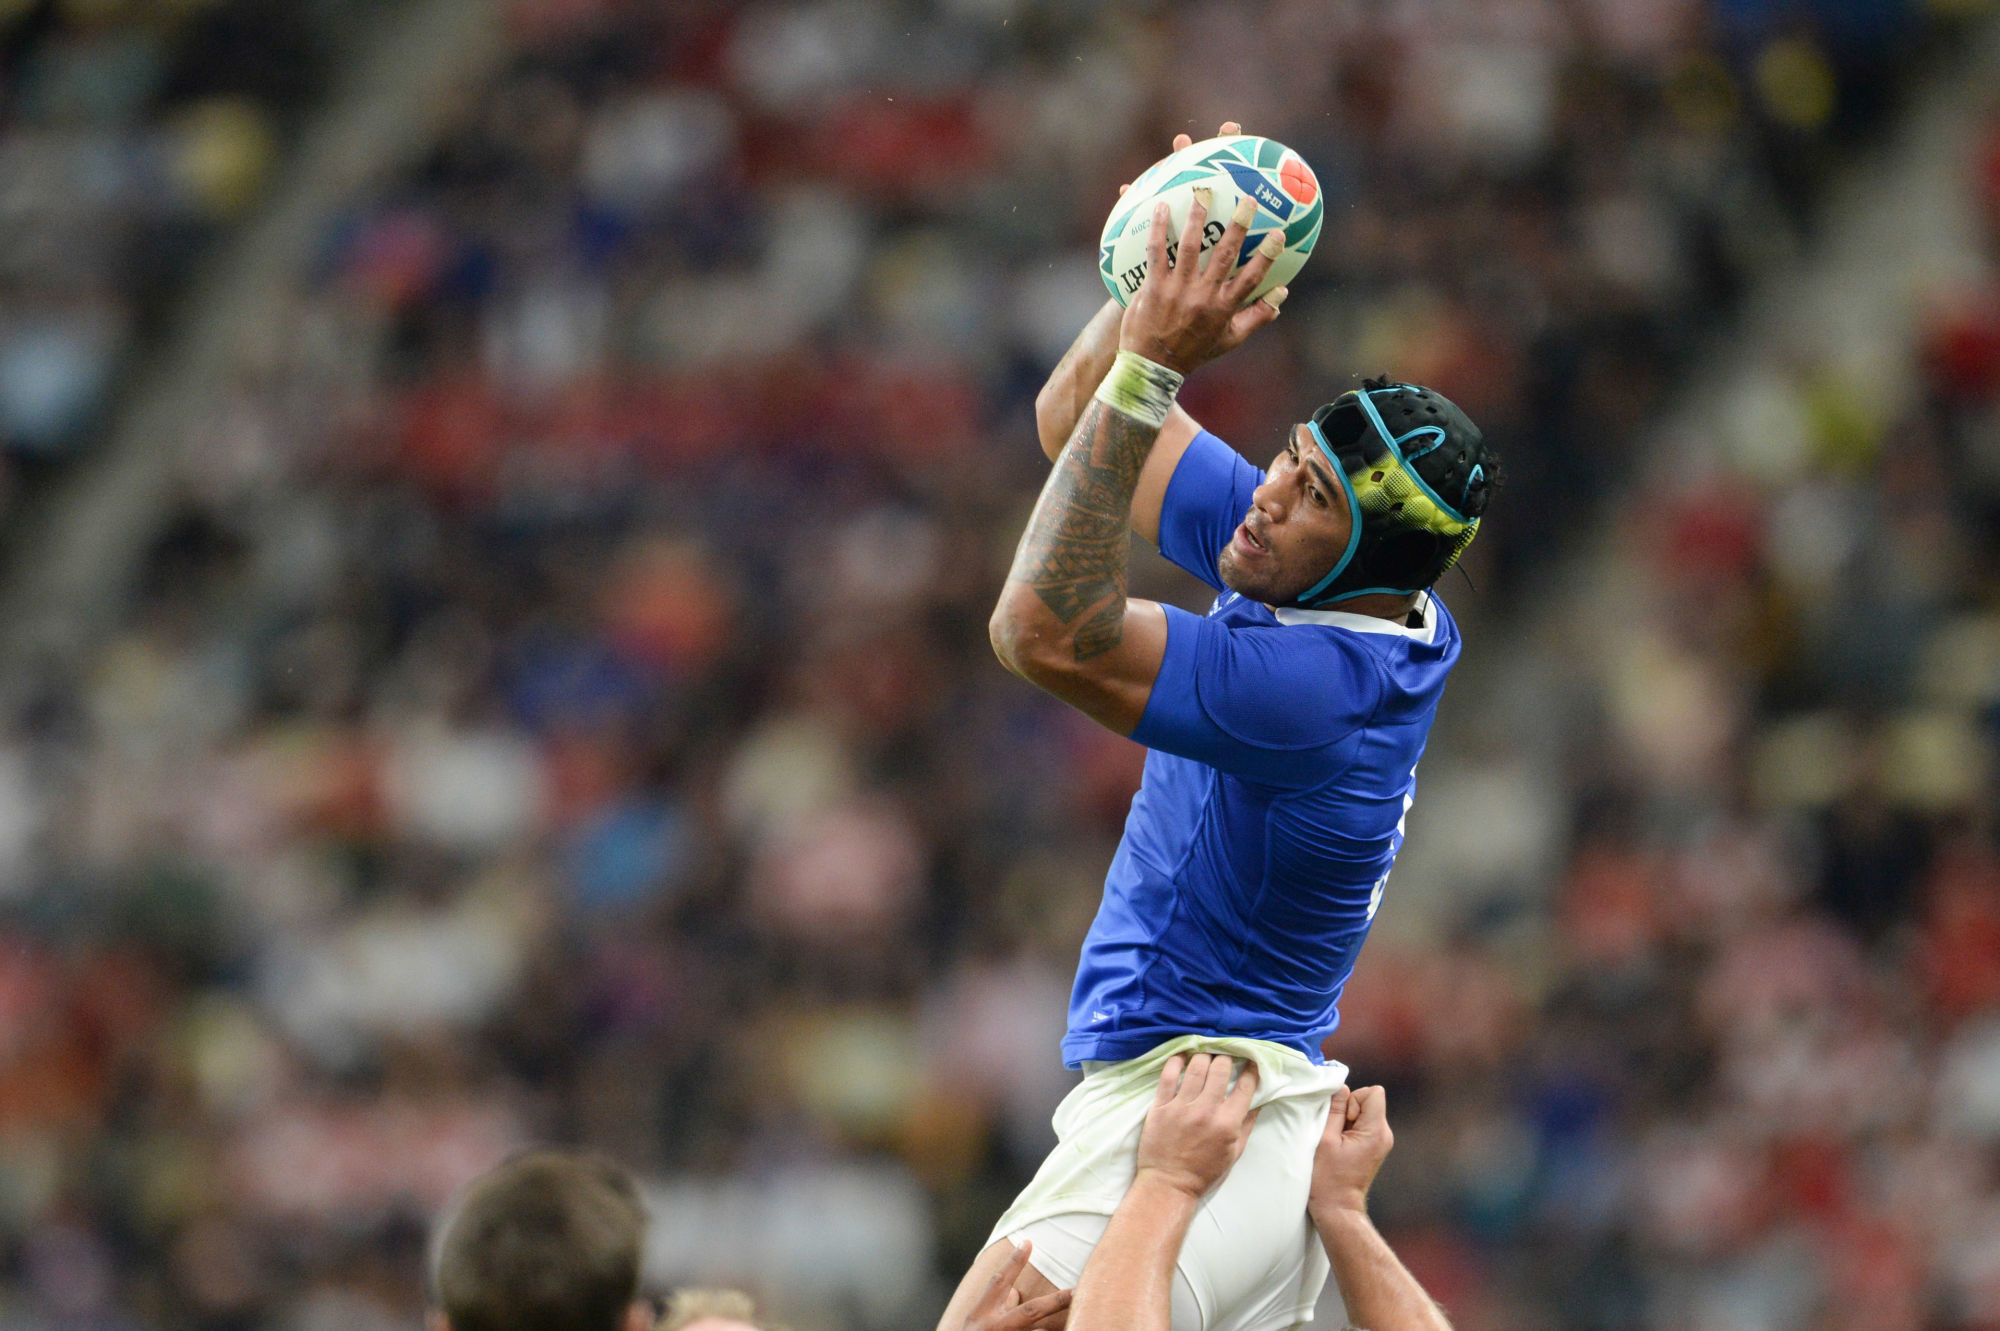 20th October 2019, Oita, Japan;  Sebastien Vahaamahina of France catches the line-out ball during the 2019 Rugby World Cup Quarter-finals match between Wales and France at the Oita Stadium in Oita, Japan  - Editorial Use 

Photo by Icon Sport - Sebastien VAHAAMAHINA - Oita Stadium - Oita (Japon)